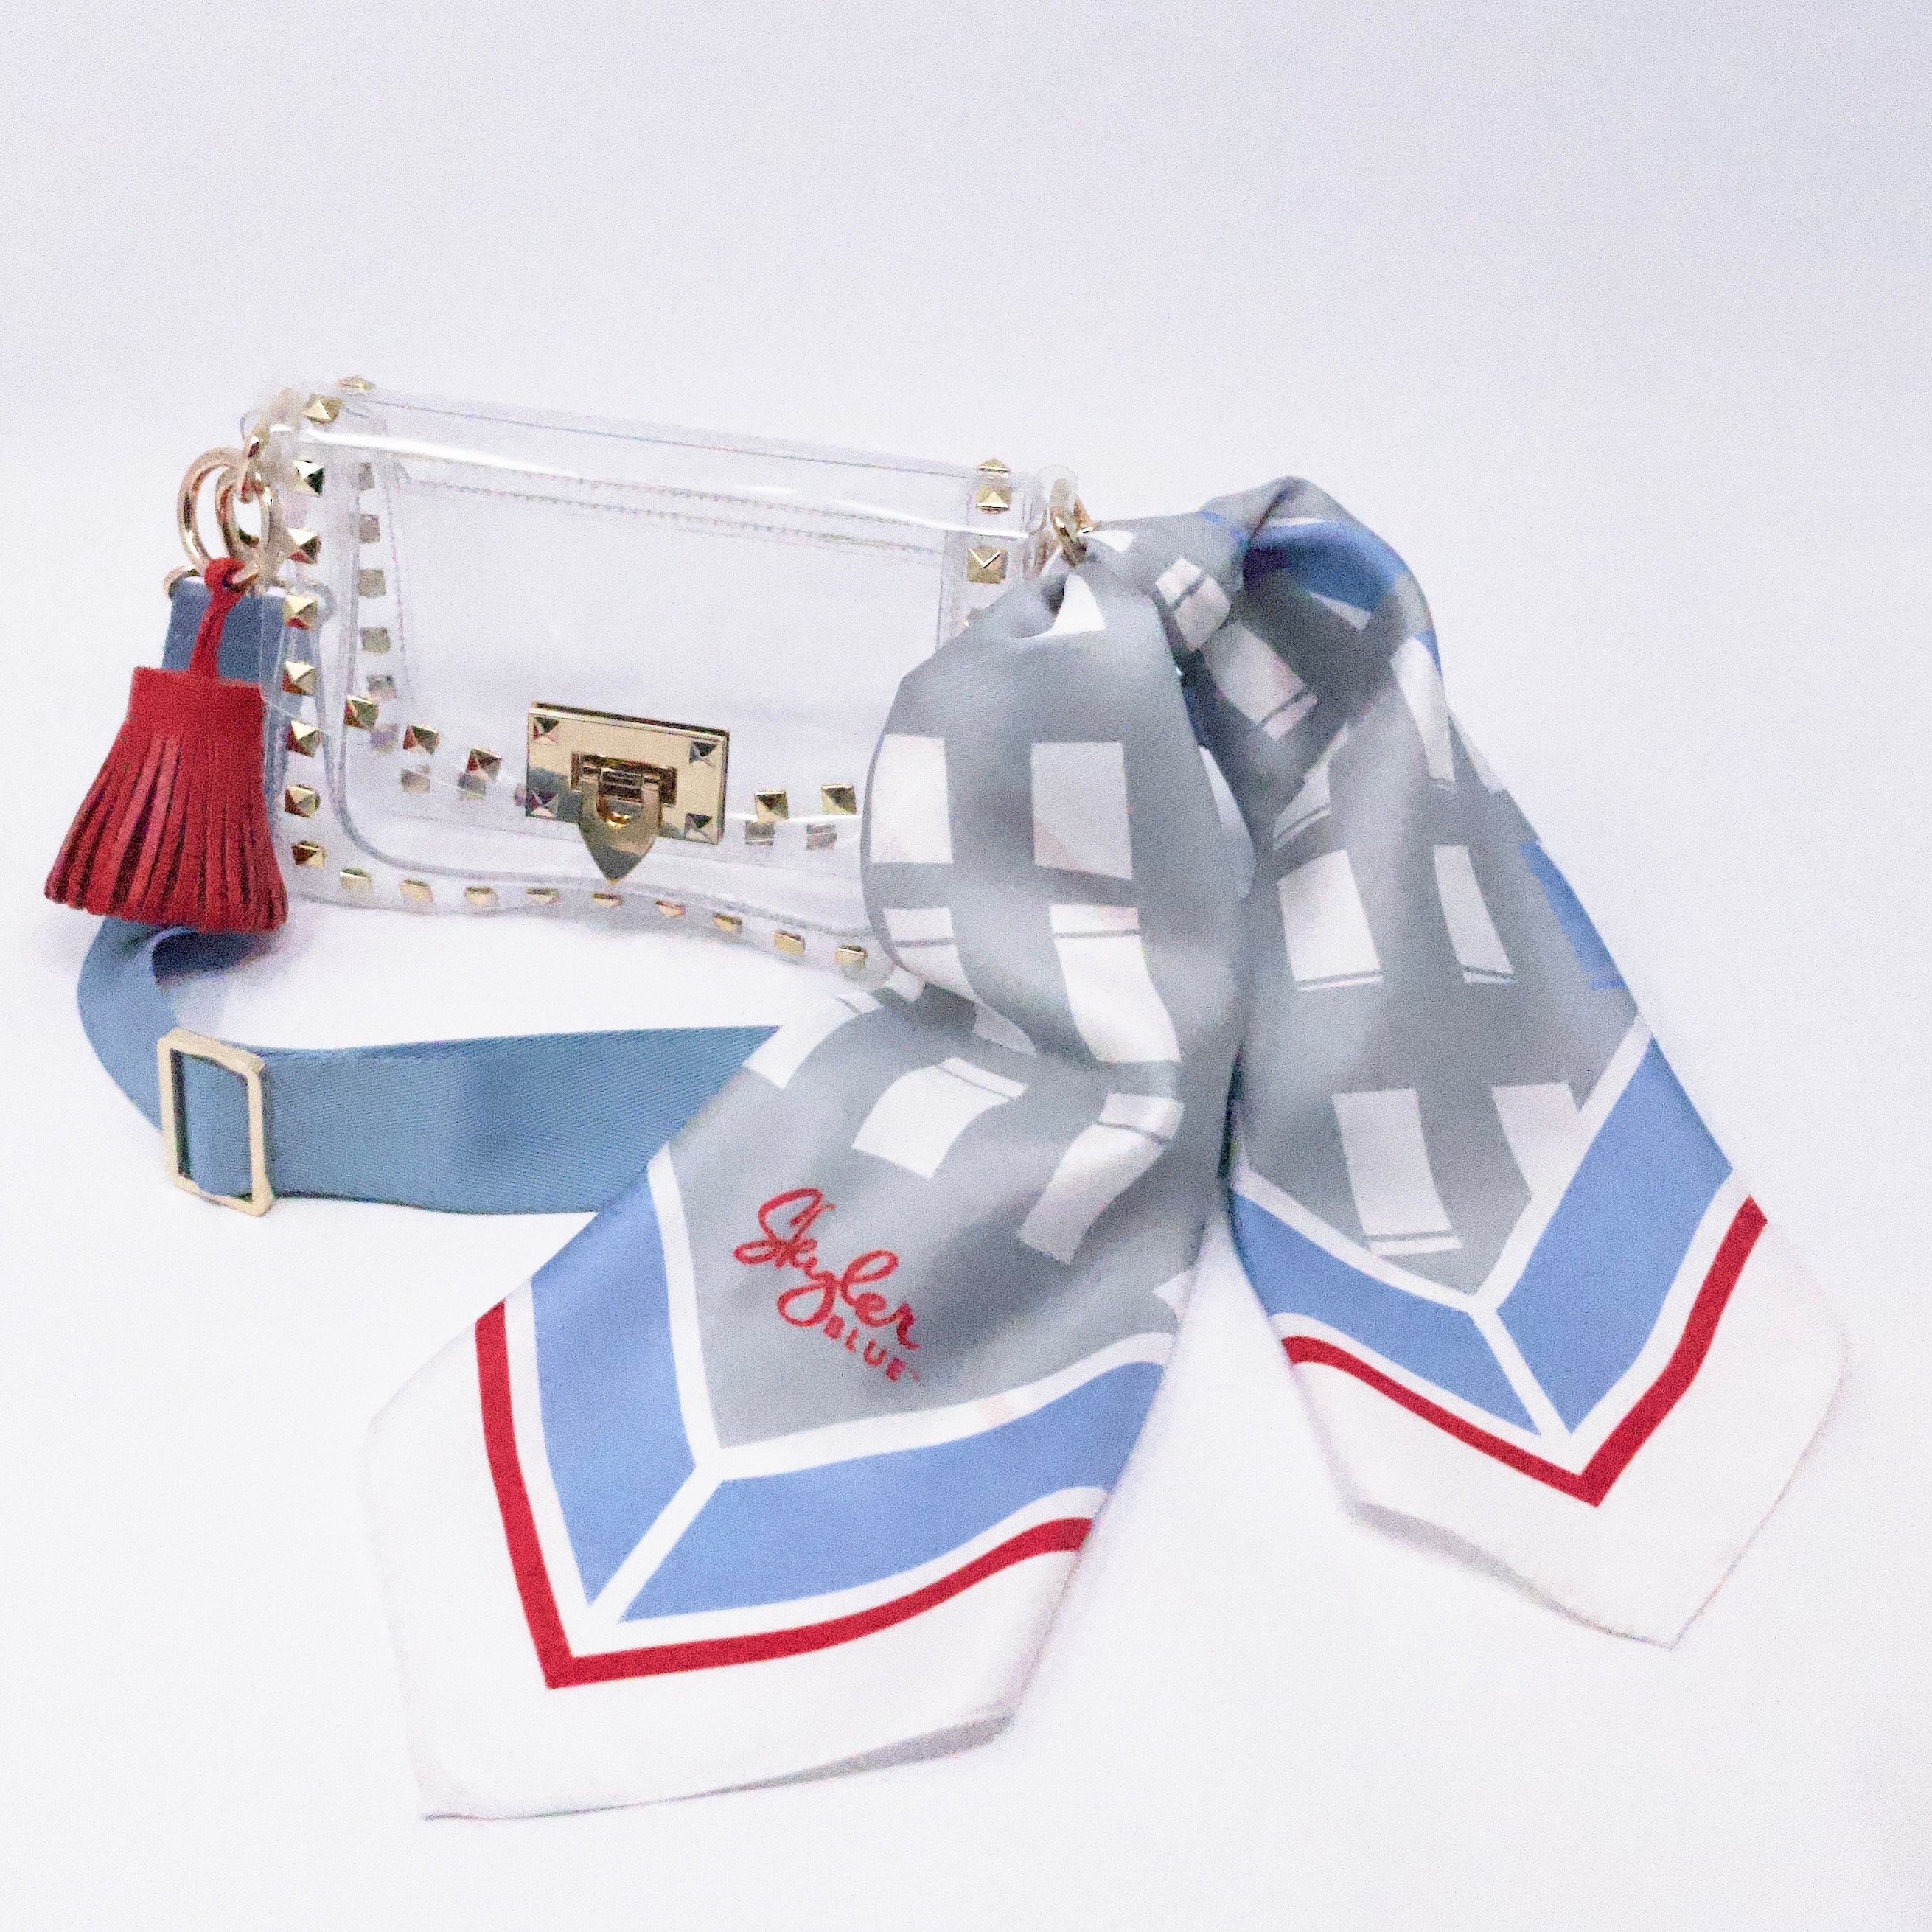 Skyler Blue’s The Dome - Luv Ya Small Studded Clear Bag stadium approved clear bag / clear purse including adjustable, nylon webbing shoulder or crossbody strap with herringbone weave and gold hardware, 60-centimeter 100% silk twill scarf, and 100% genuine leather tassel. 